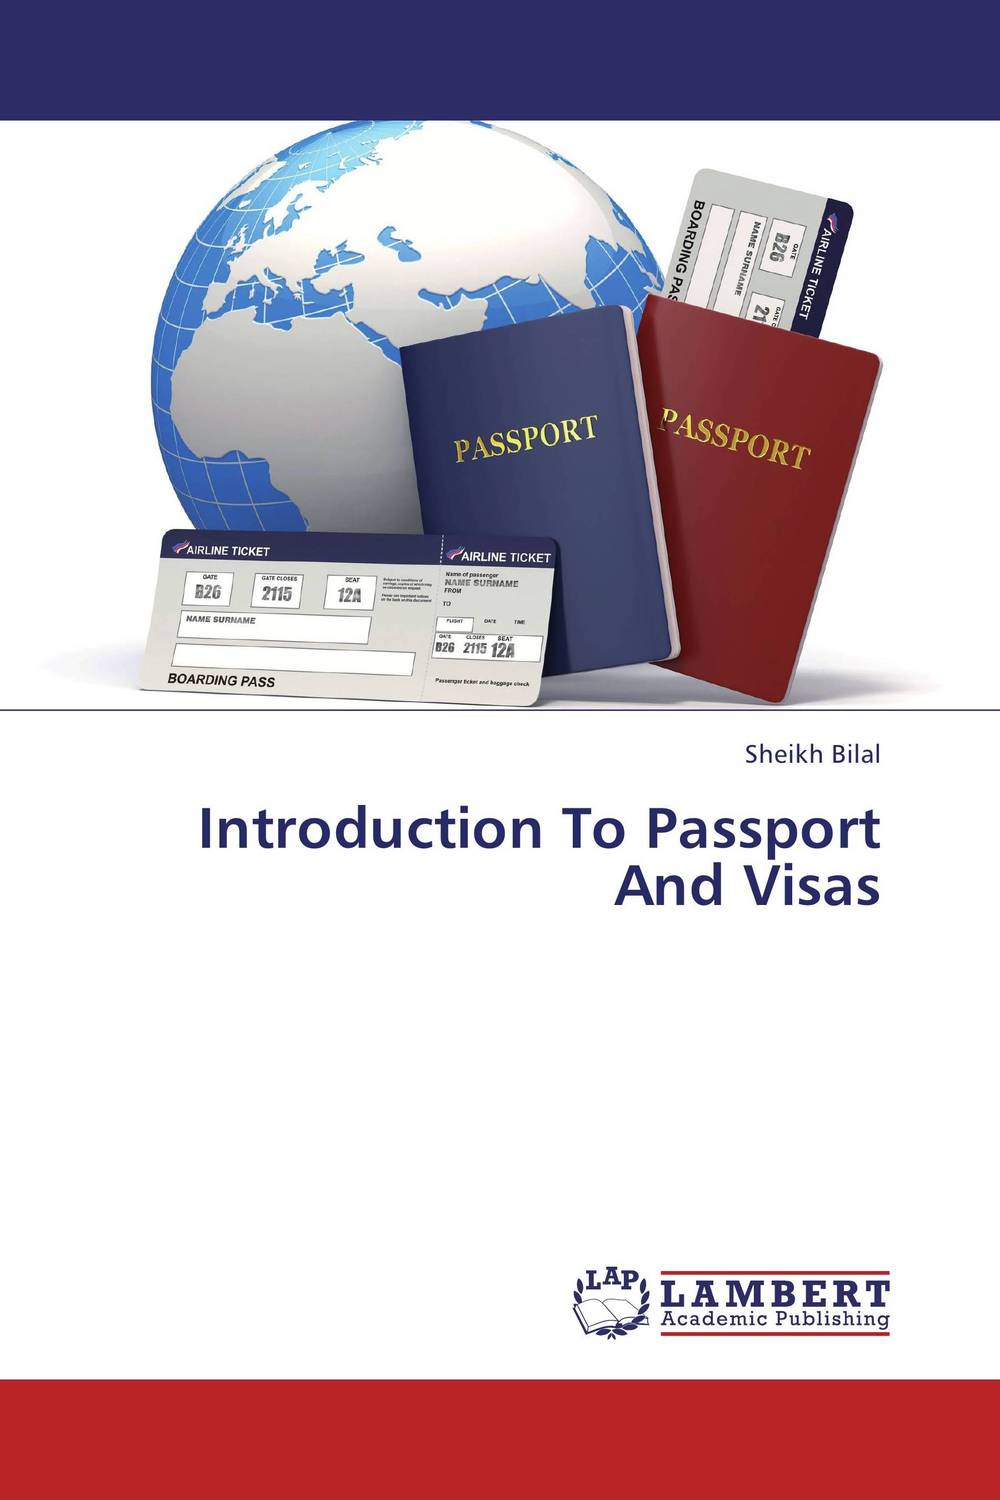 Introduction To Passport And Visas